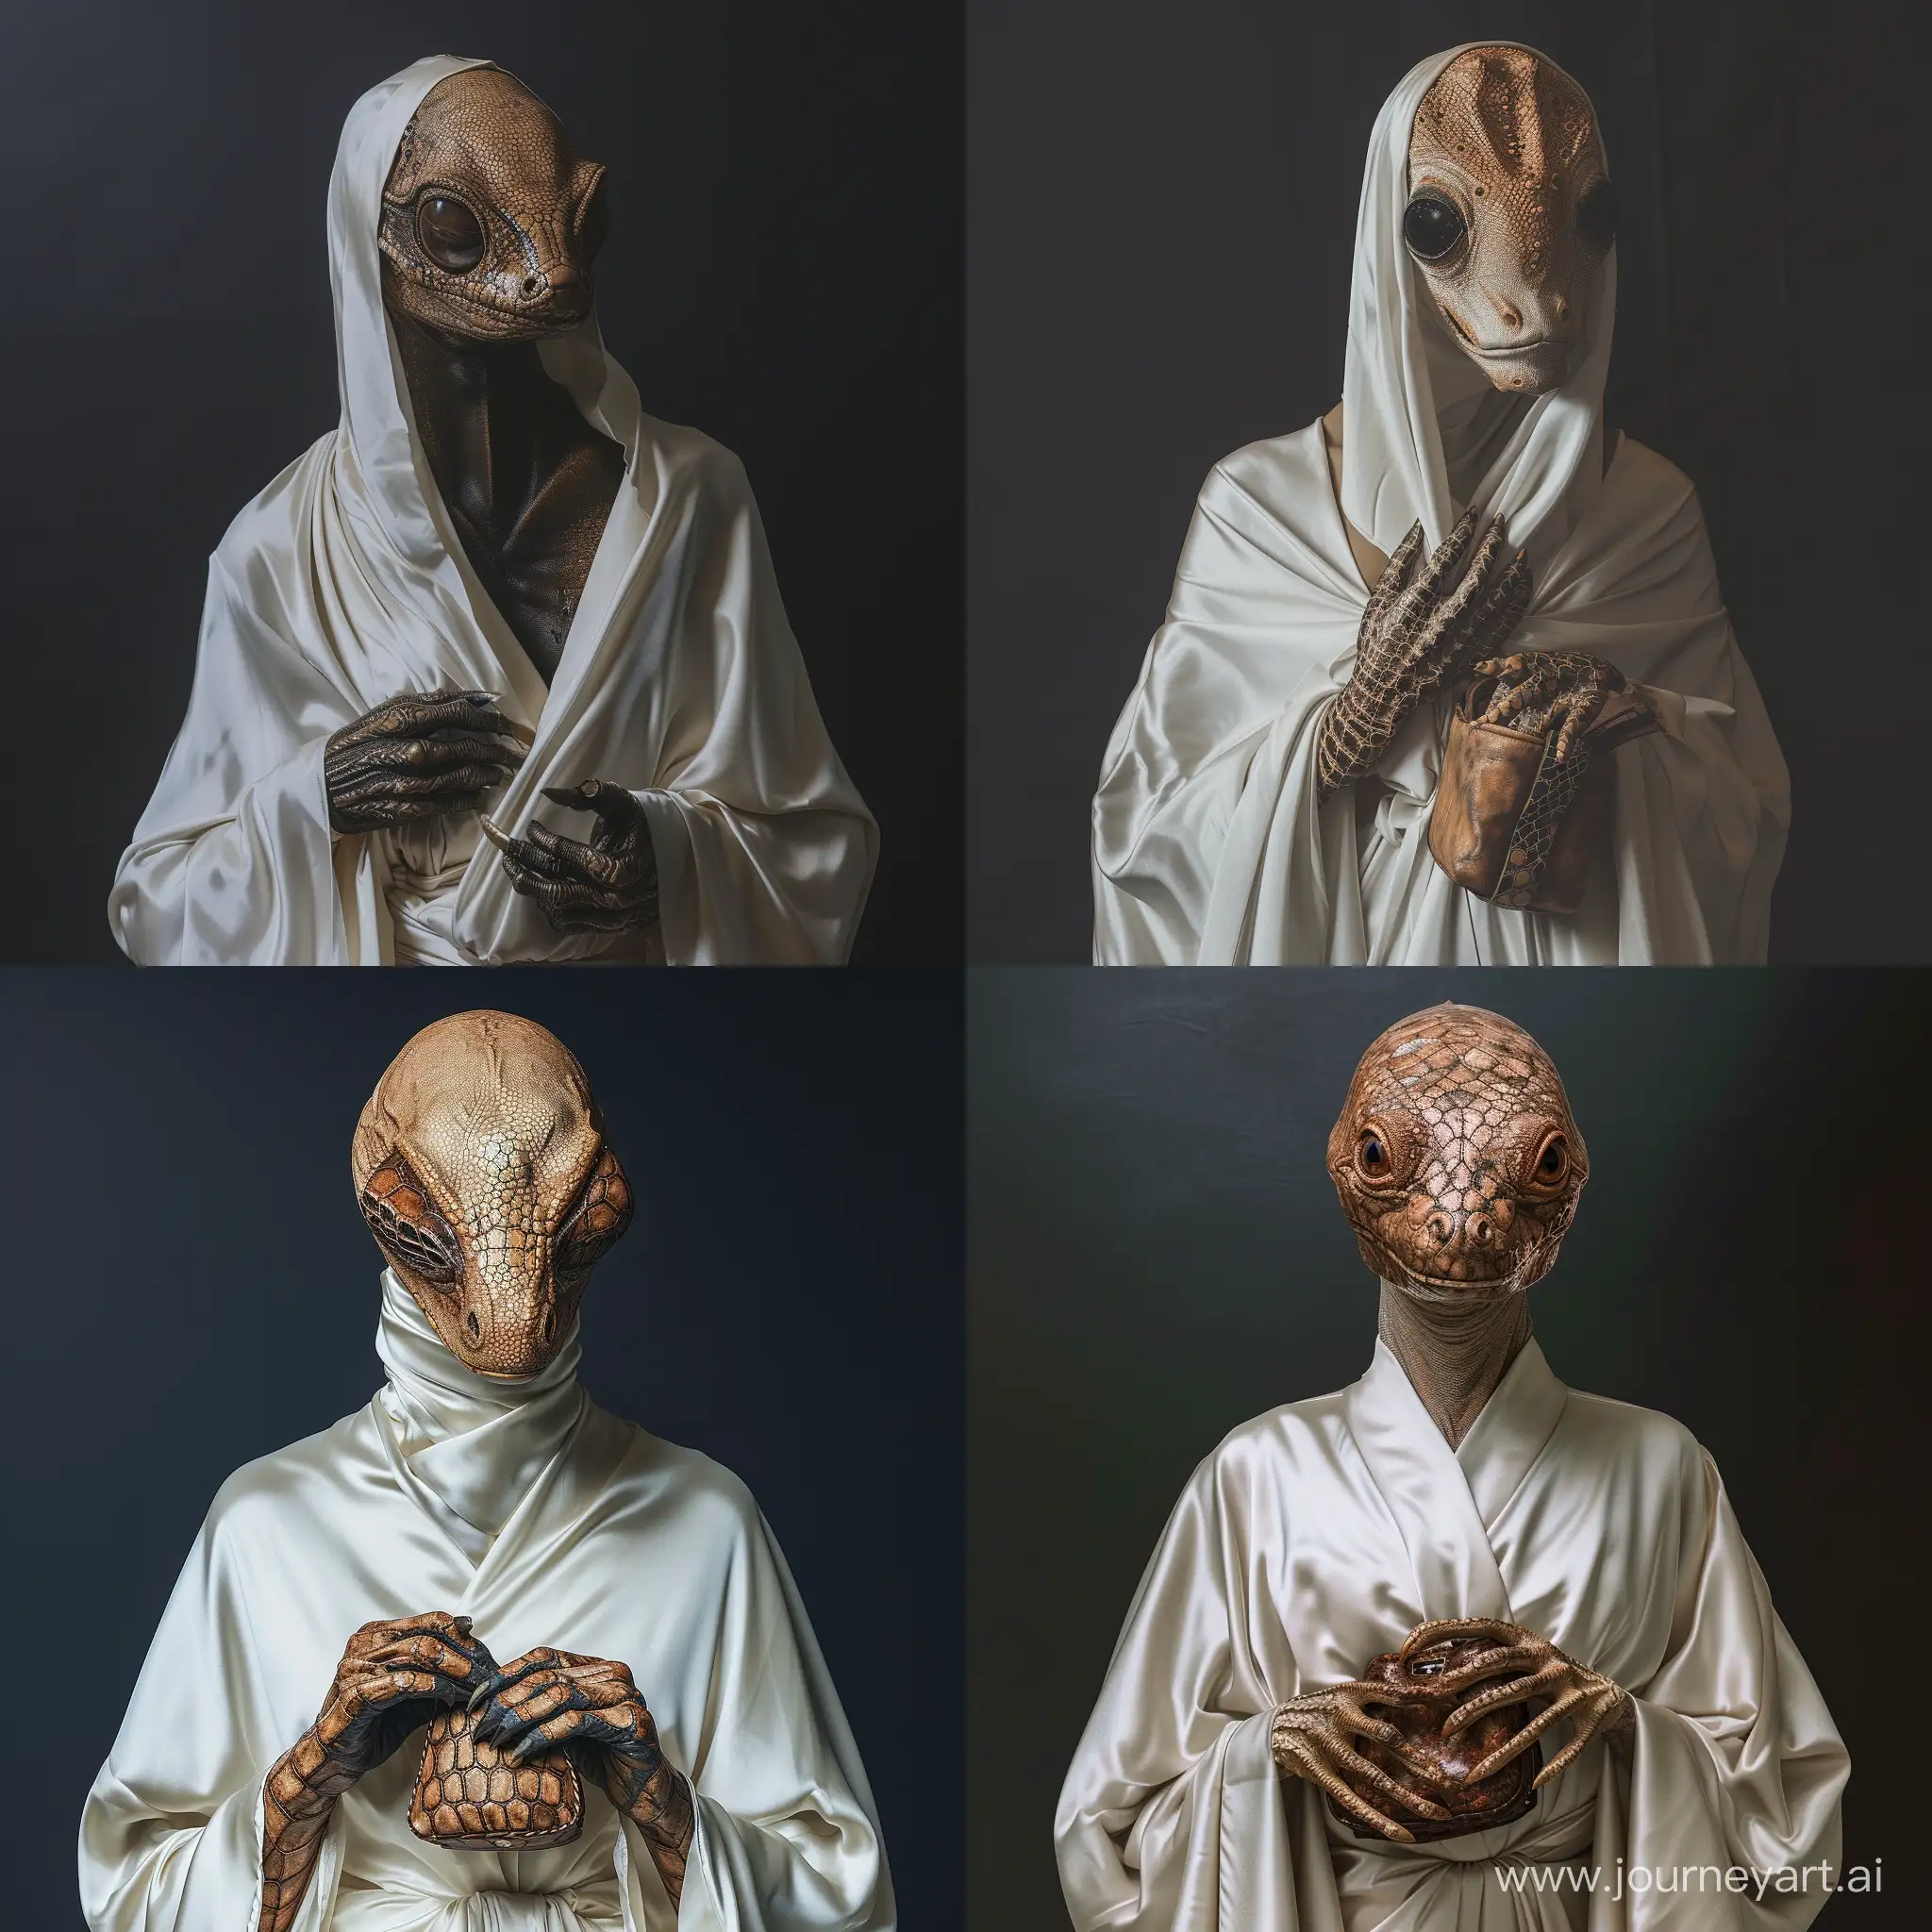 Extraterrestrial-Elegance-HumanFaced-Alien-in-Silk-Robe-with-Reptilian-Mask-and-Bag